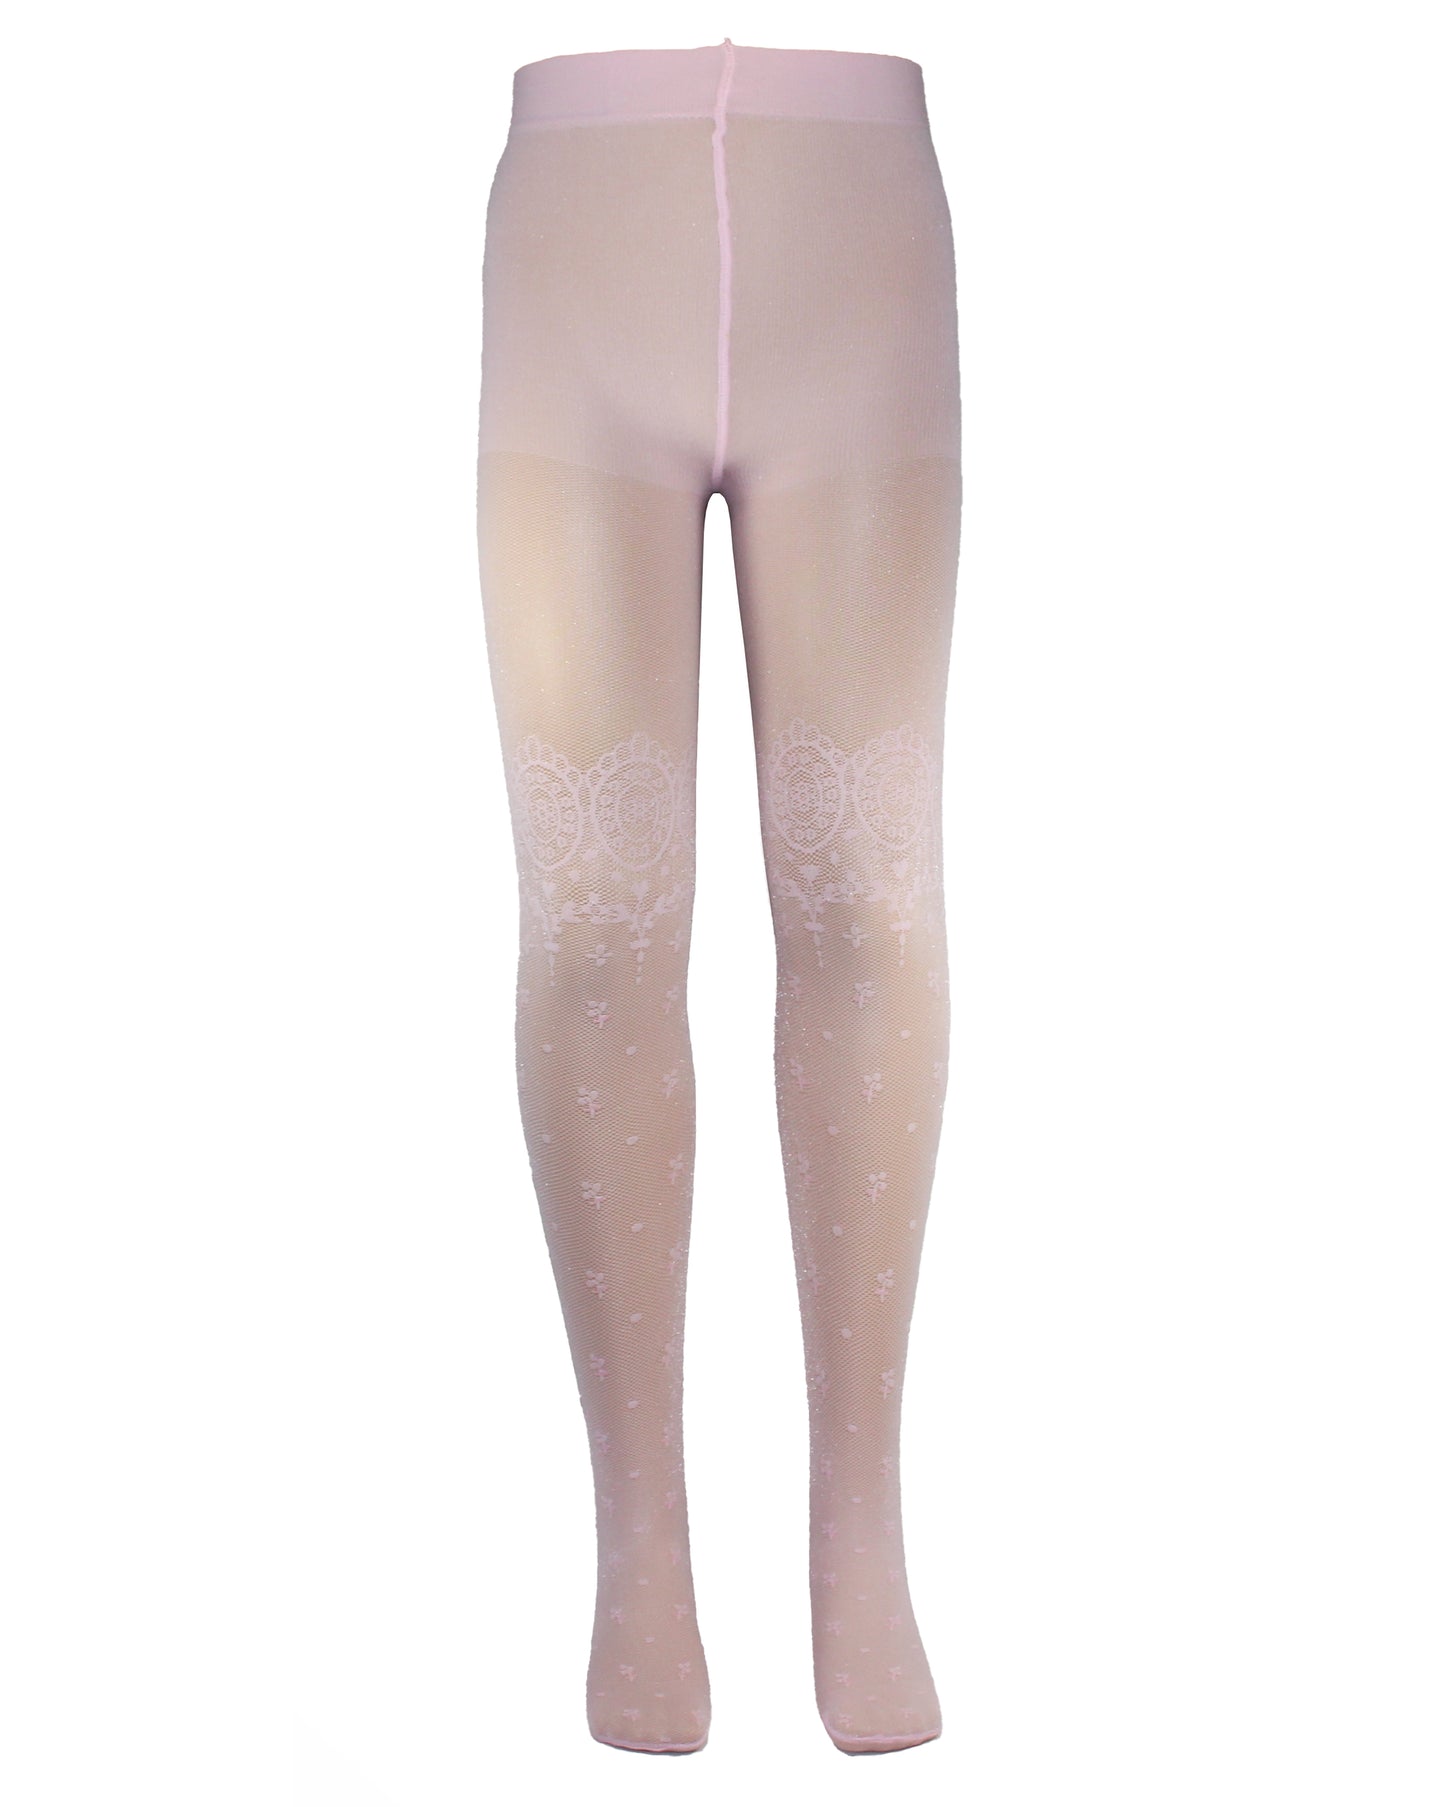 Omsa Cordoba Collant - Light baby pink semi opaque micro mesh kid's fashion tights with an all over woven flower and spot pattern and circular lace effect over the knee bands.